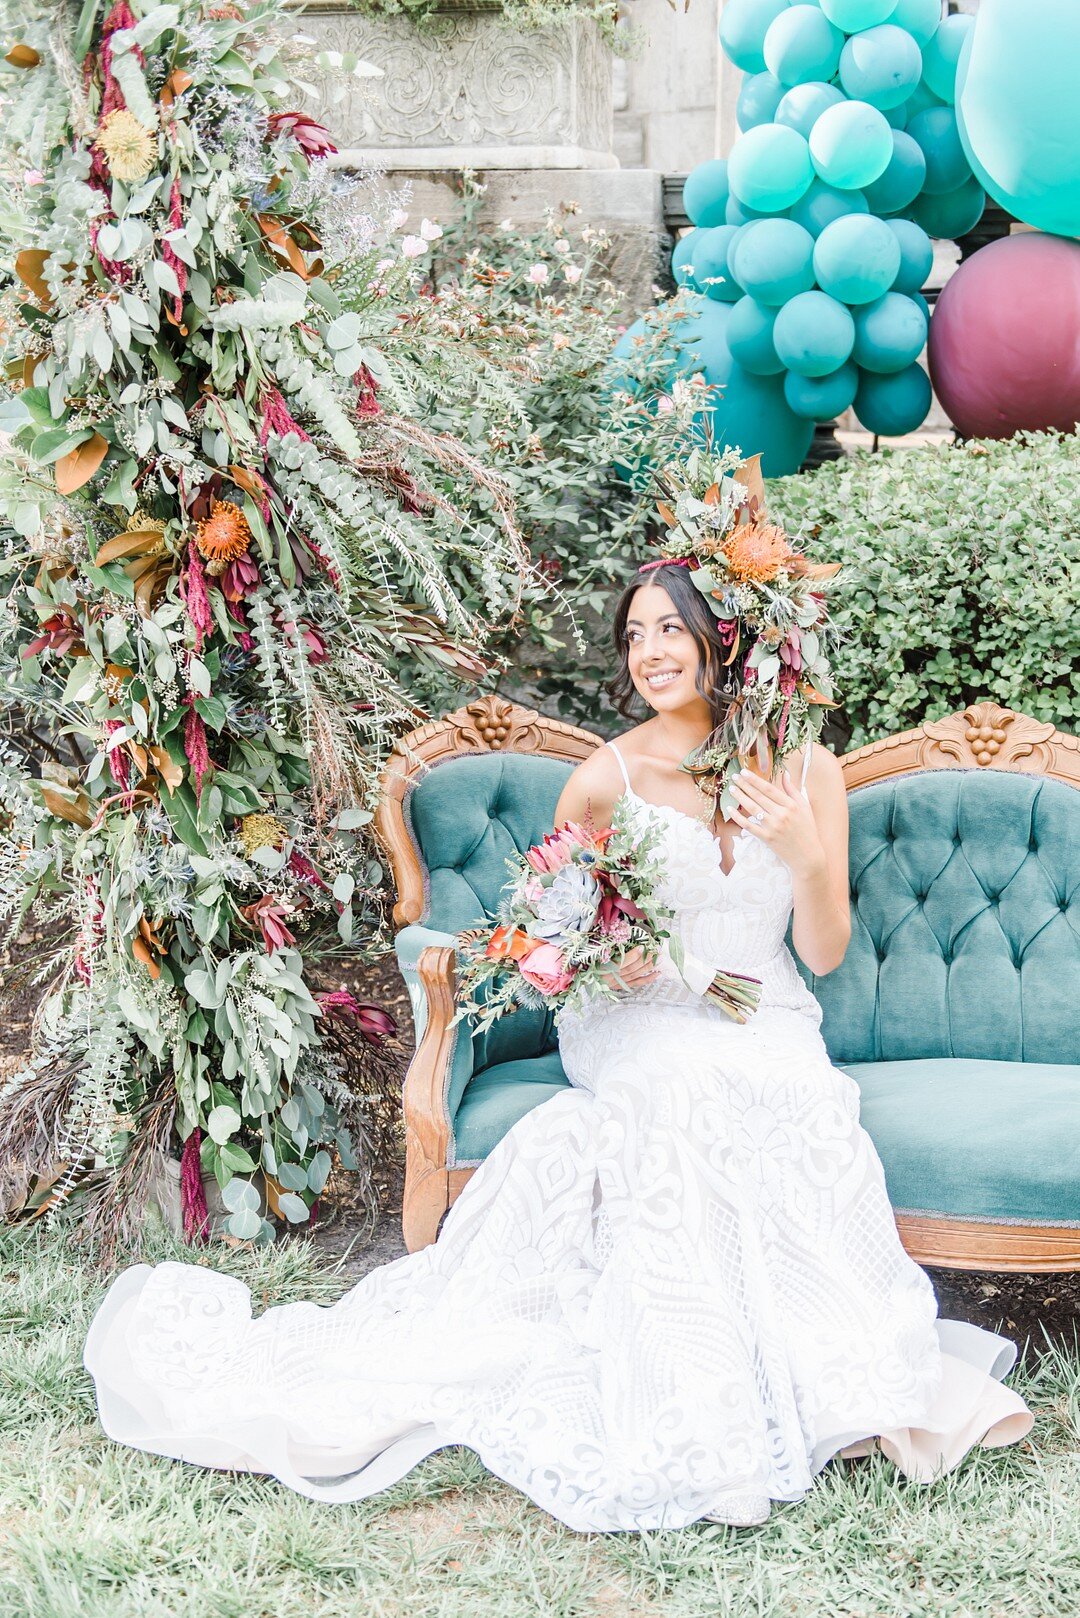 Francesca Michetti Photography captured the bold, bright, fun colors of fall in this inspired wedding styled shoot featuring a feather bouquet and floral headpiece for the bride. Concept and planning by Peonies Events and other Philadelphia wedding …